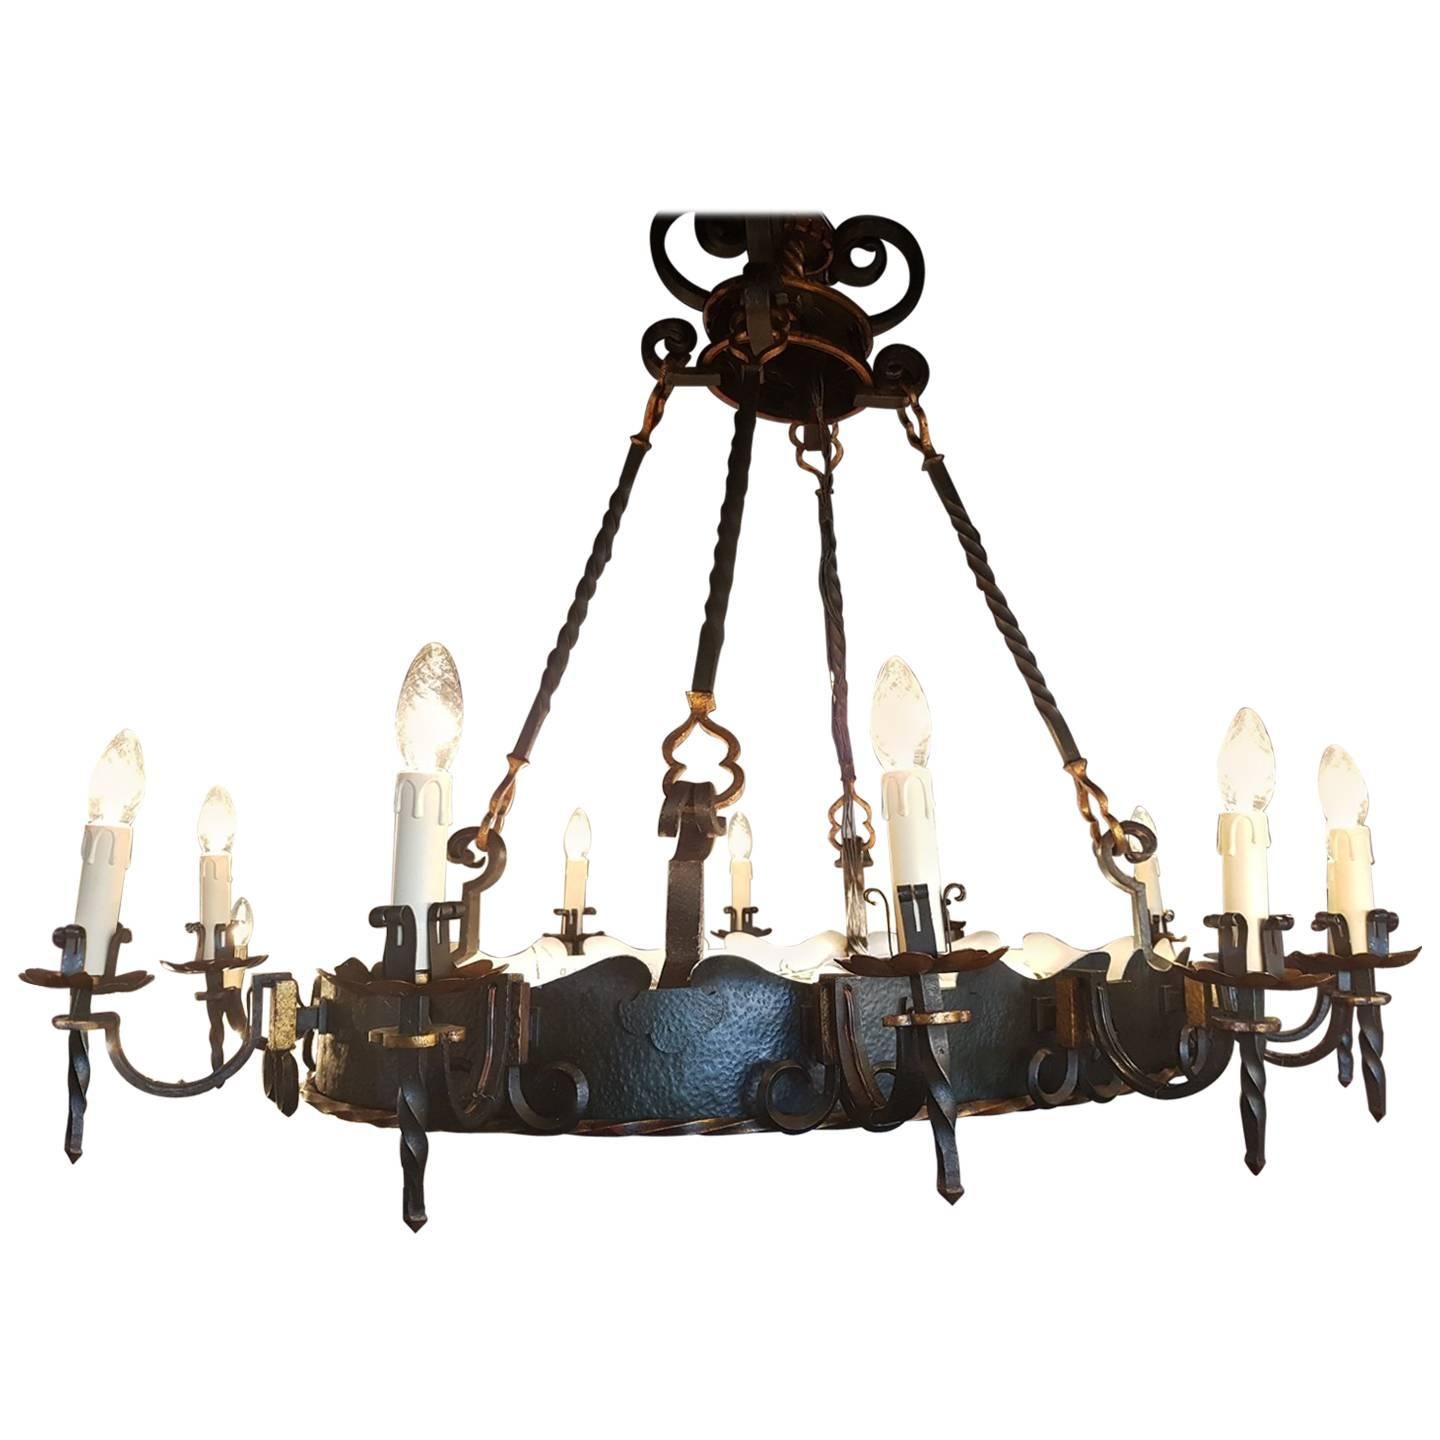 Large Oval Wrought Iron Castle Chandelier with 20 Lights For Sale